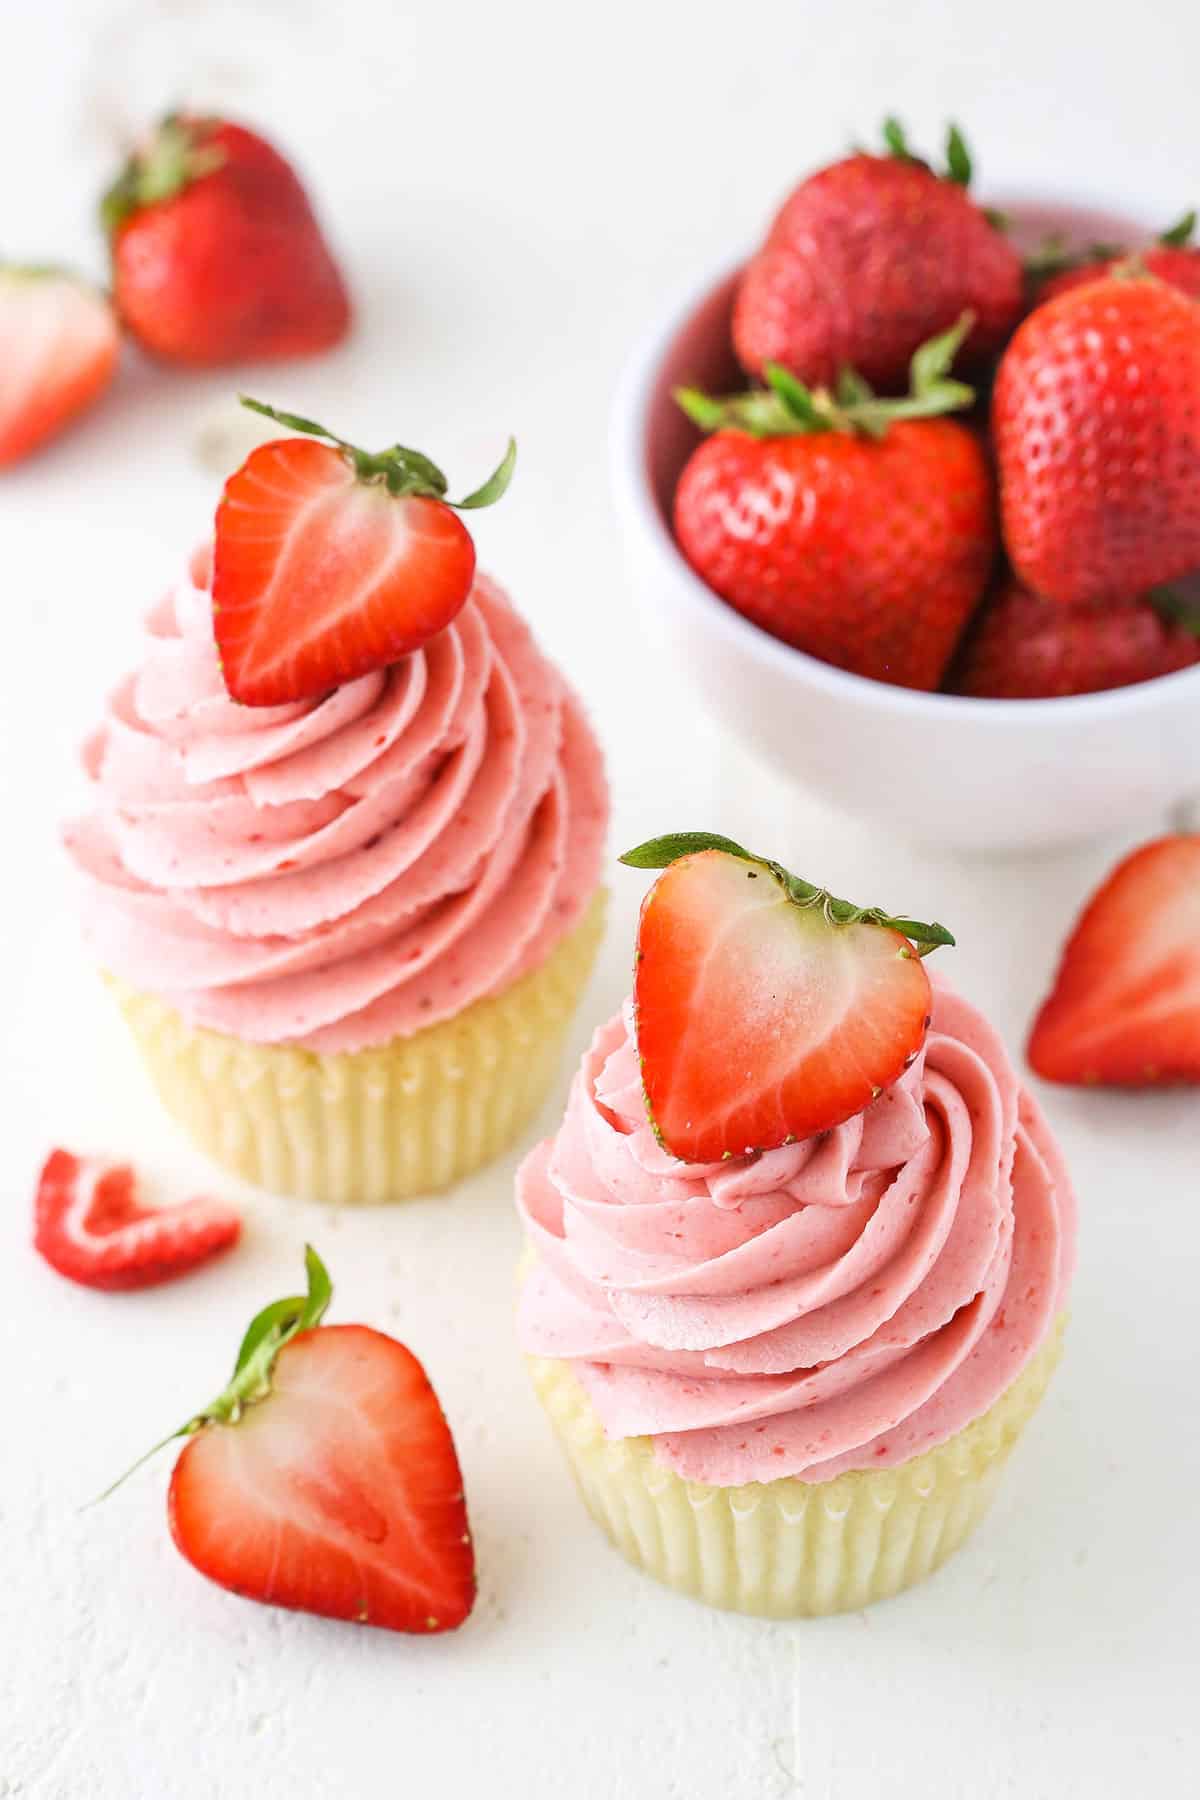 Two vanilla cupcakes with Homemade Strawberry Frosting piped on top